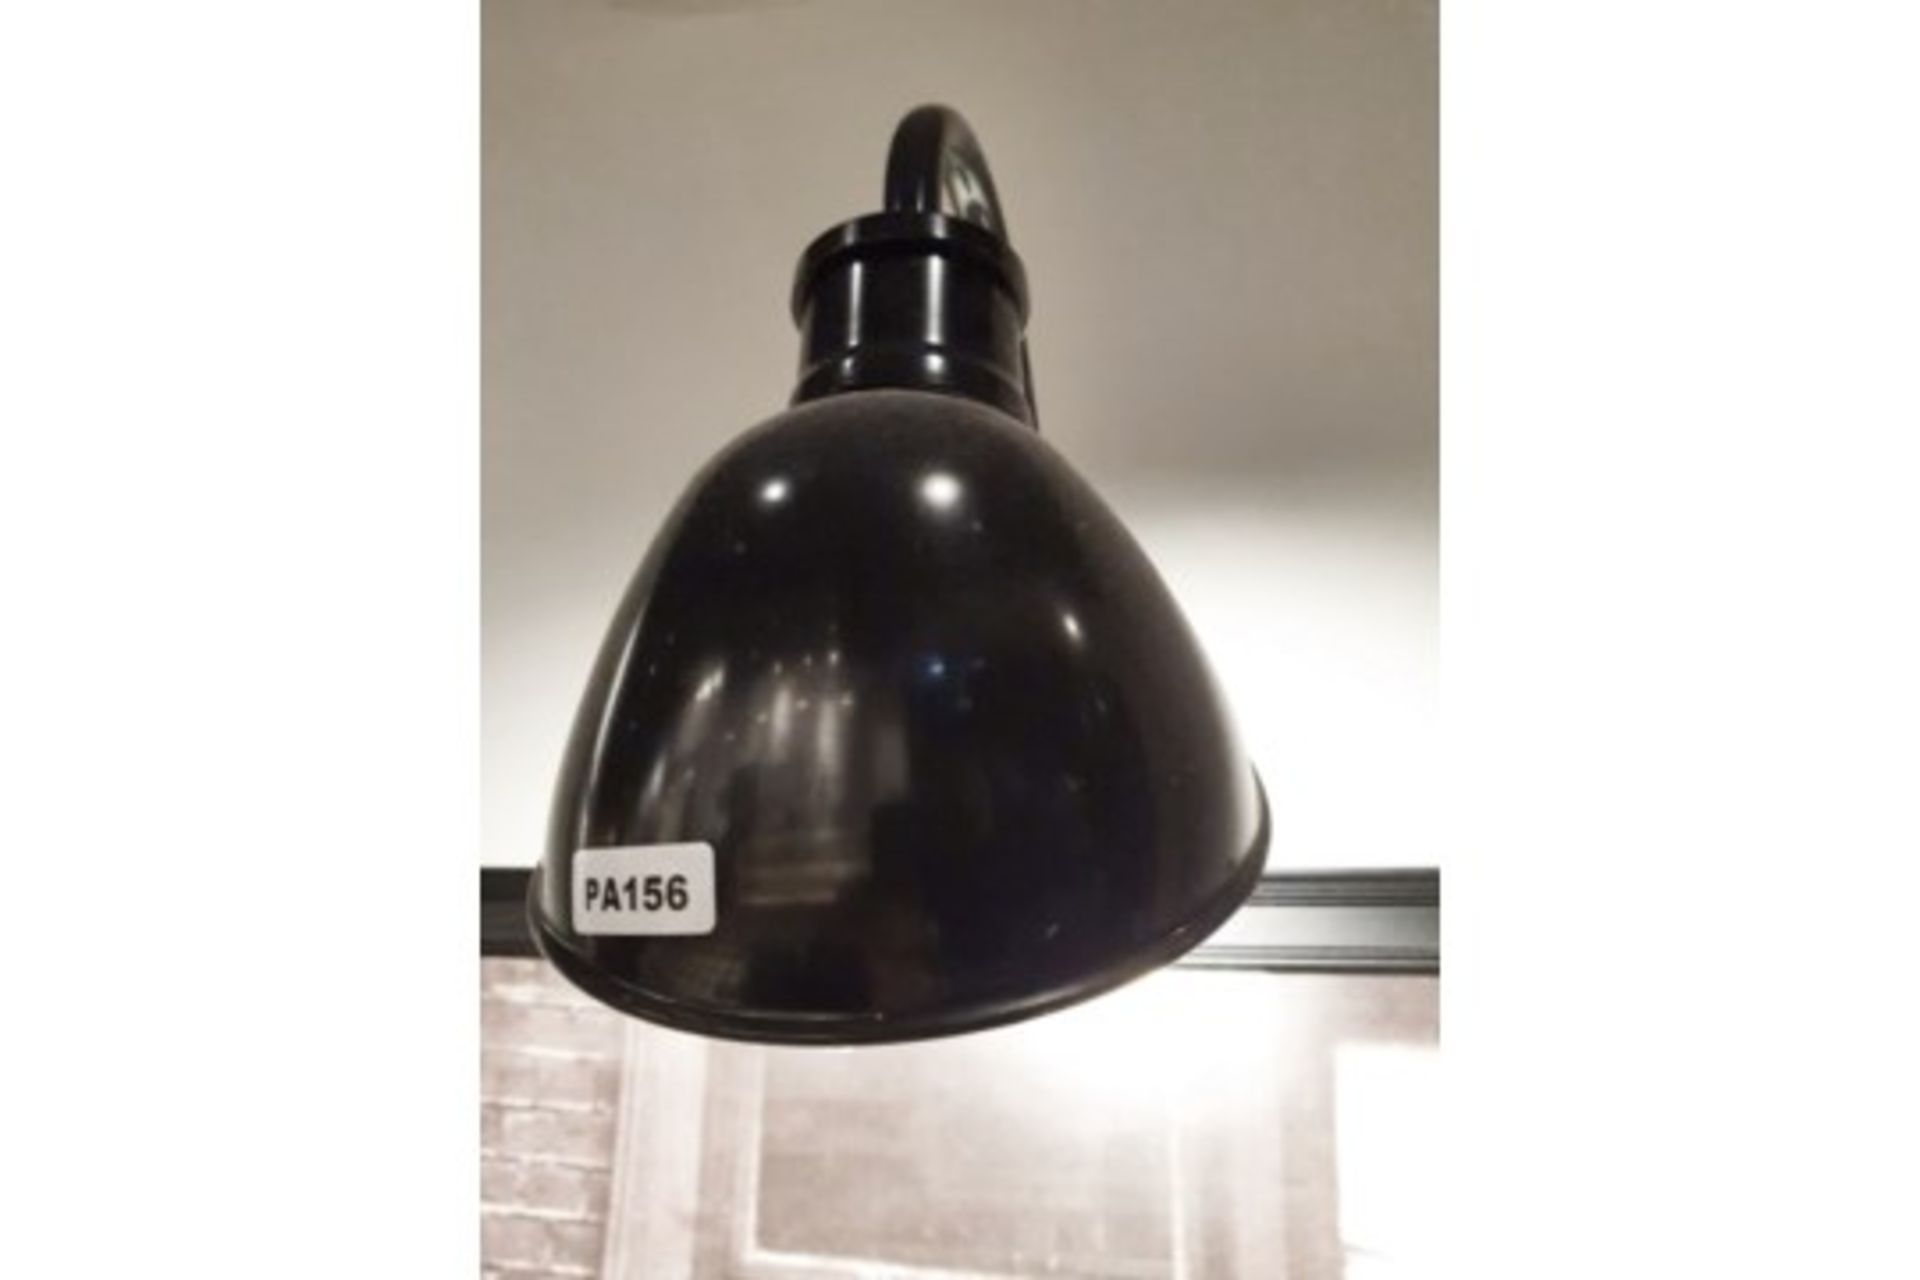 6 x Ceiling Pendant Lights in Black Plus 1 x Matching Wall Light - 26cm Diameter - Ref PA156 - CL463 - Image 3 of 5